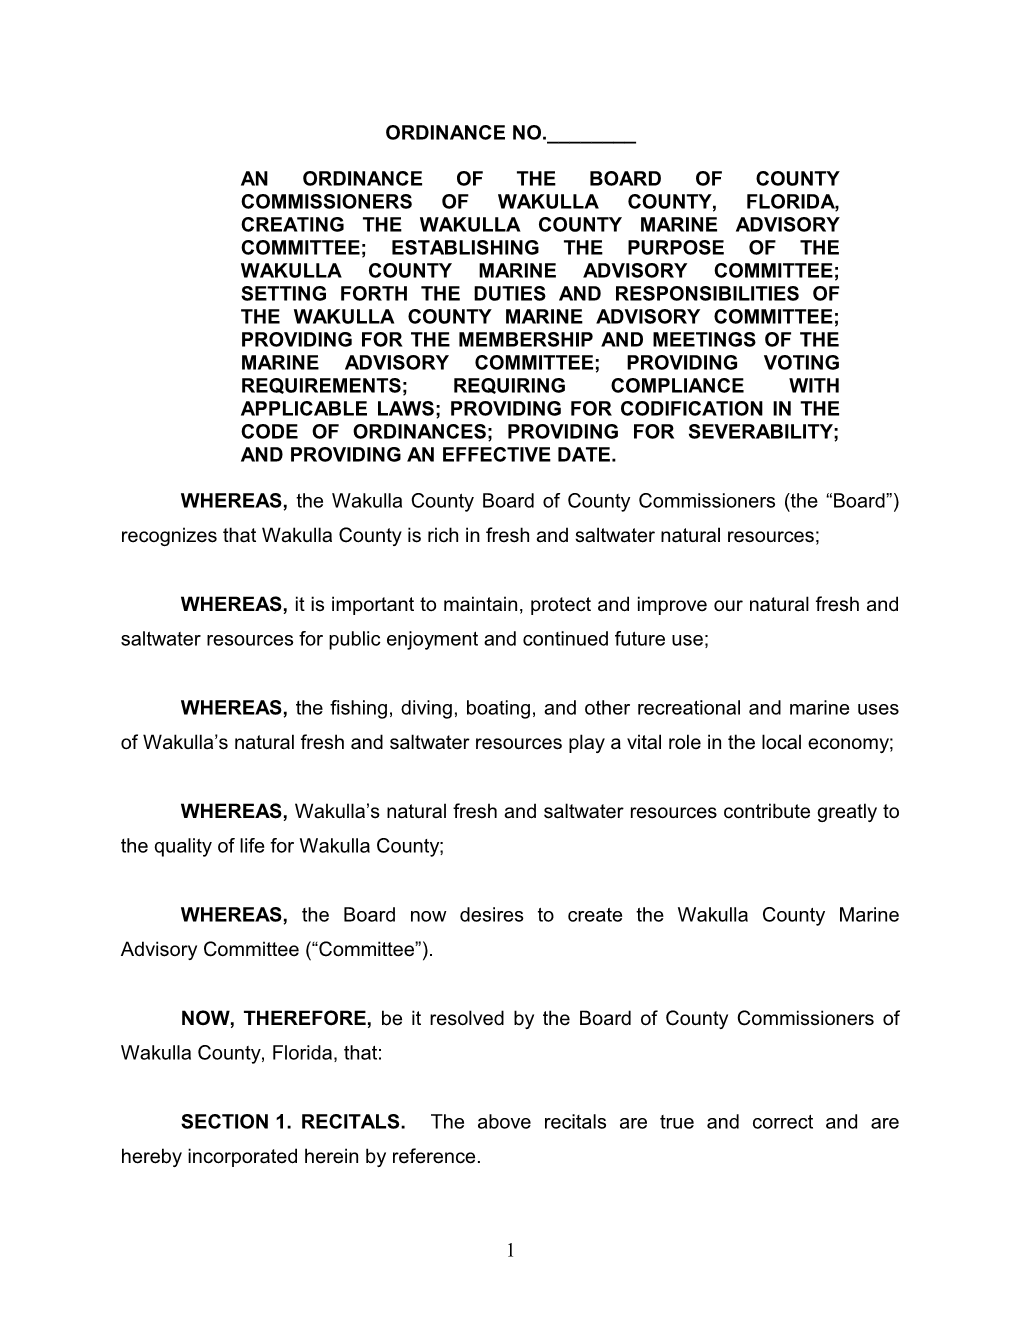 An Ordinance of the Board of County Commissioners of Wakulla County, Florida, Creating